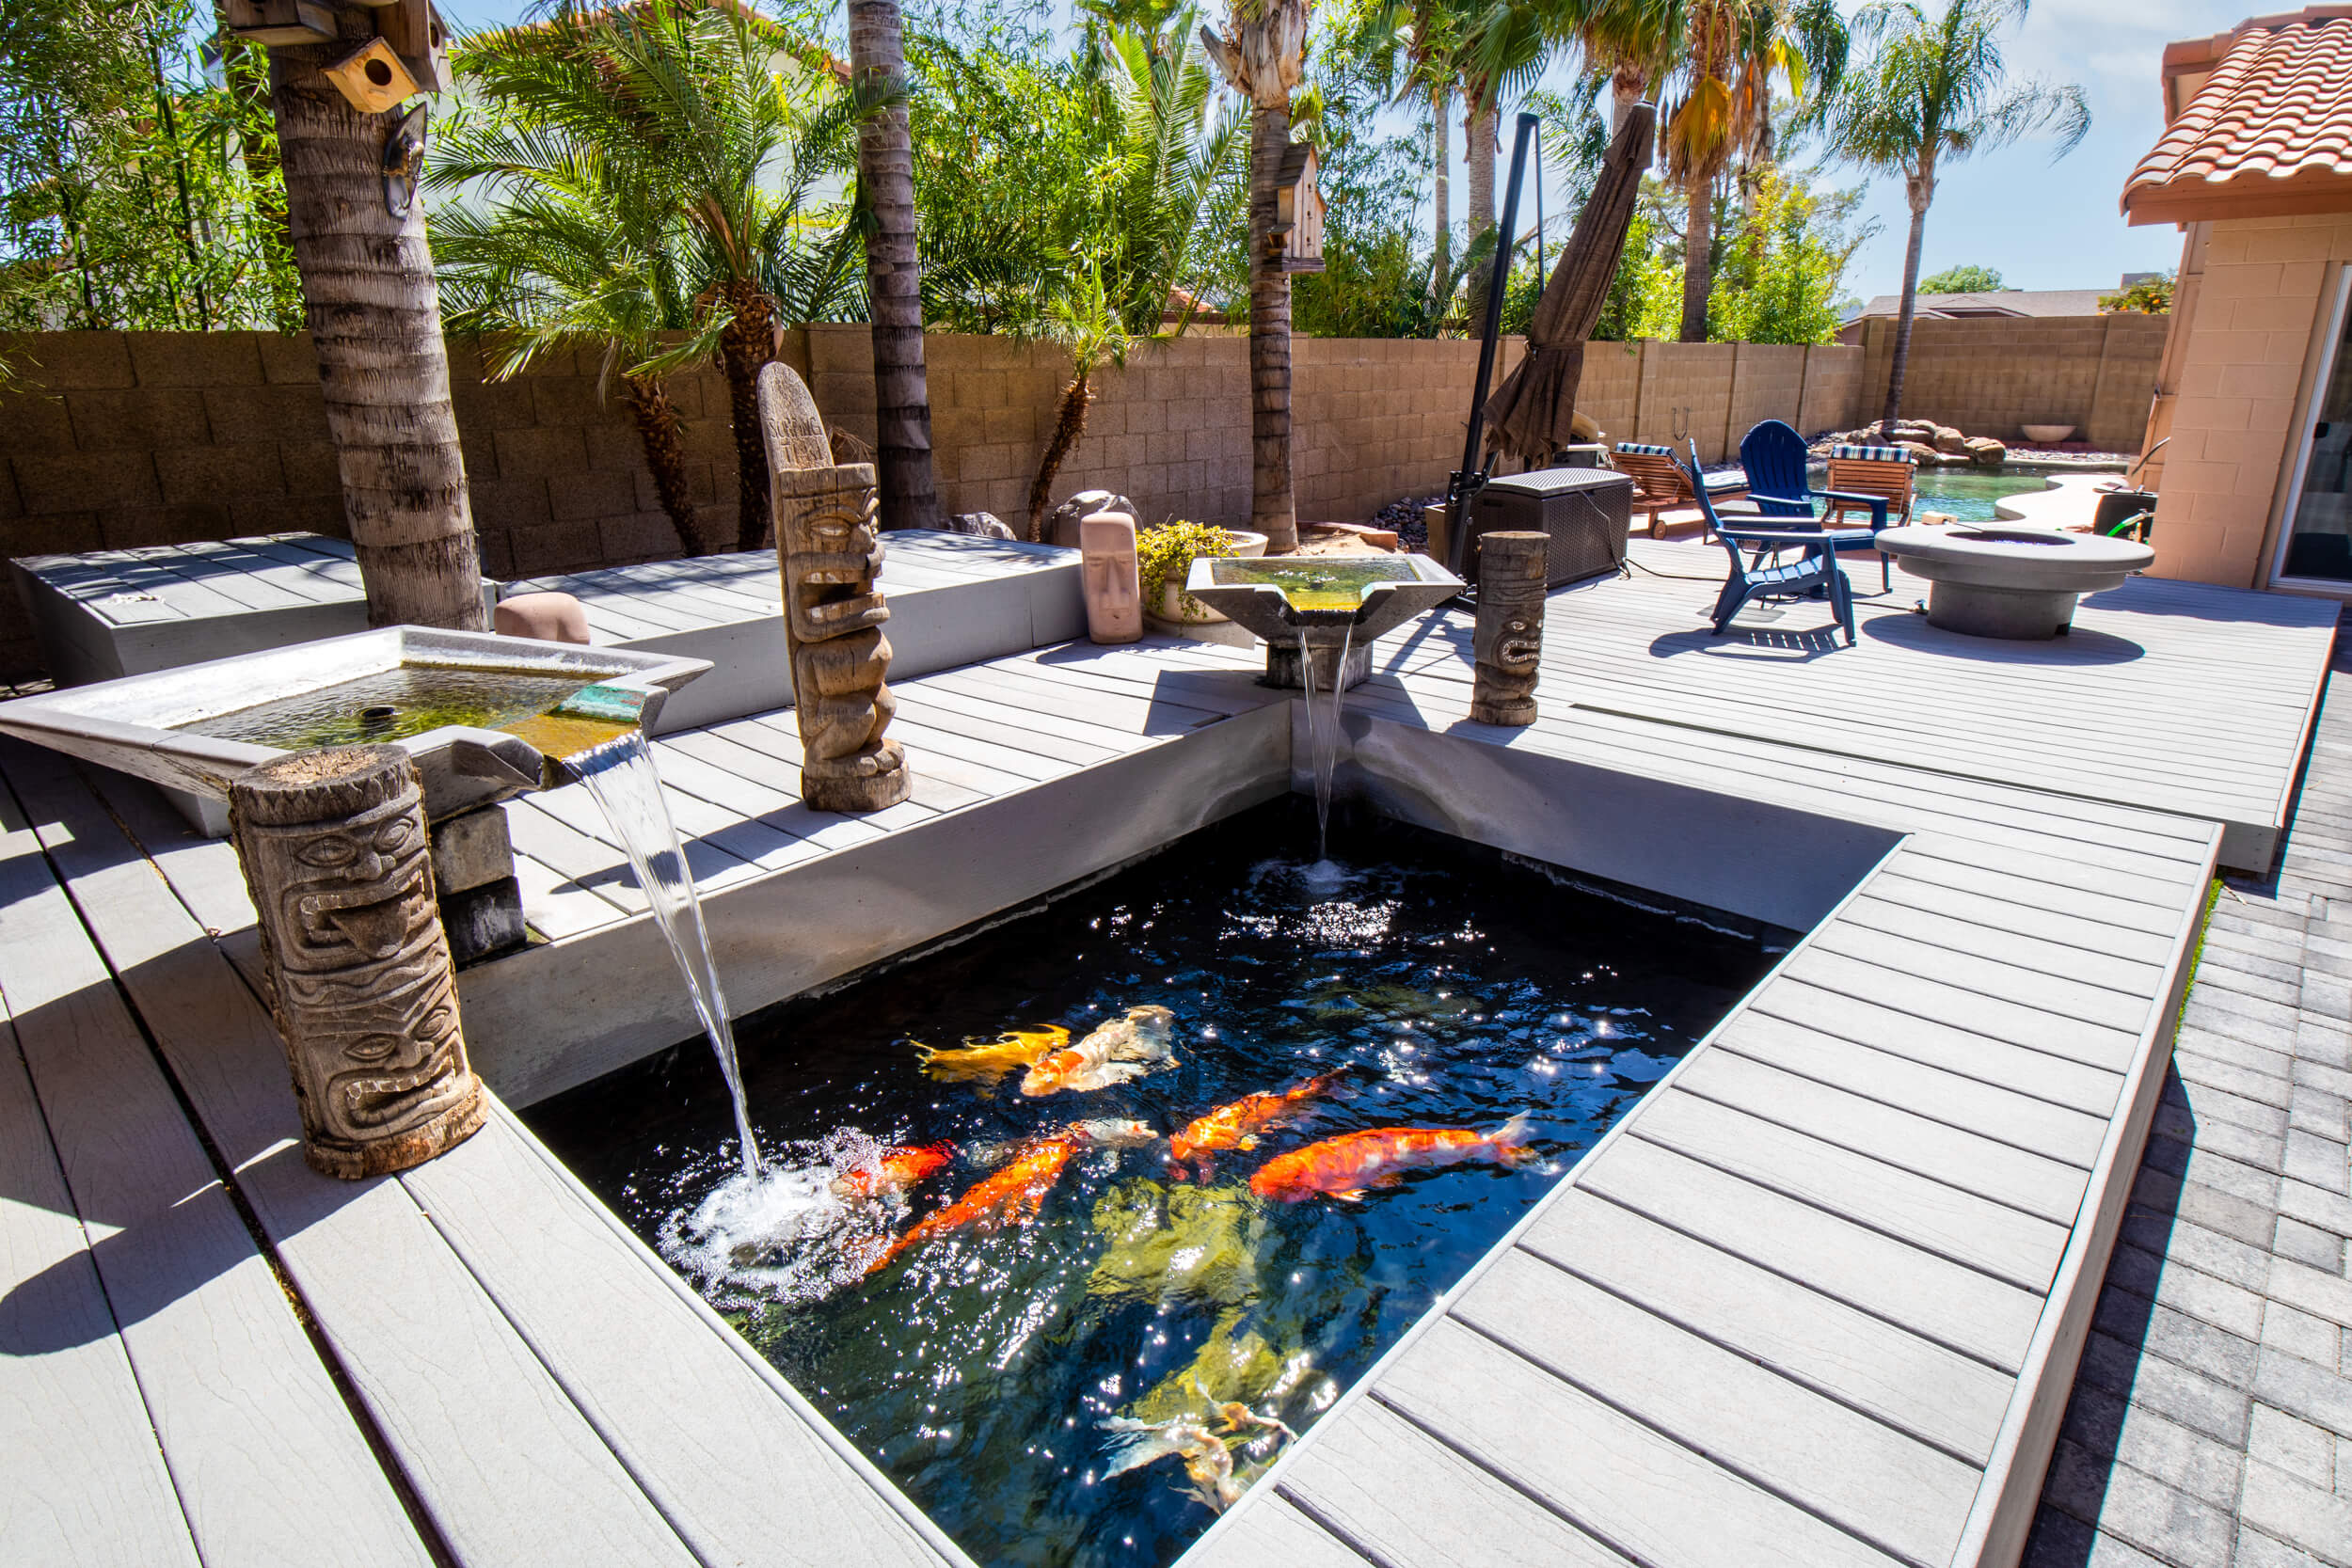 Backyard water feature at mens supportive living home in Phoenix.